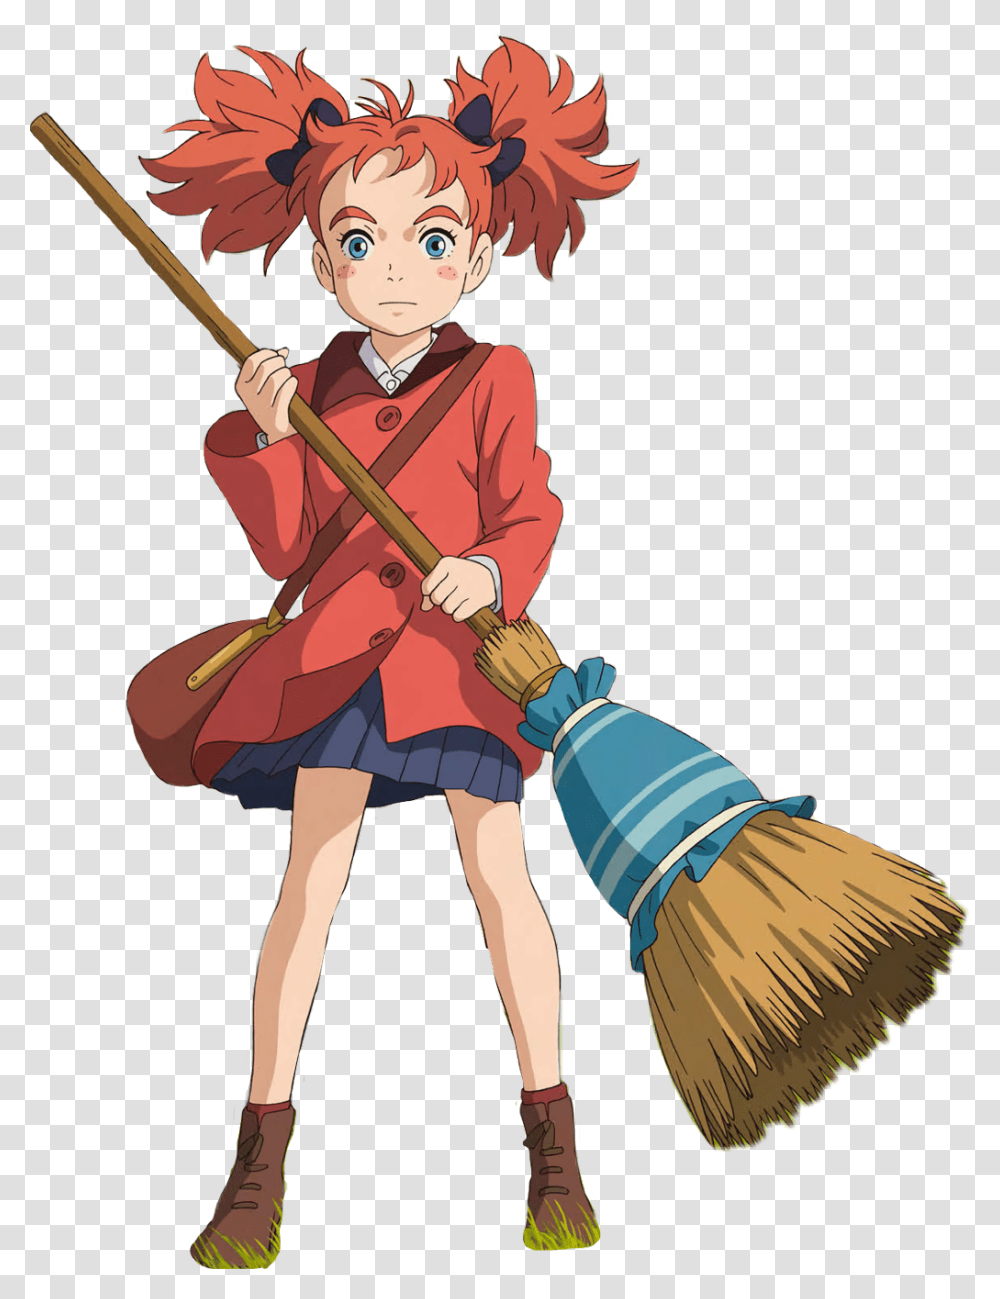 Ftestickers Maryandwitchsflower Mary Witch Girl Tib And Gib Mary And The Witch's Flower, Person, Human, Broom, Cleaning Transparent Png